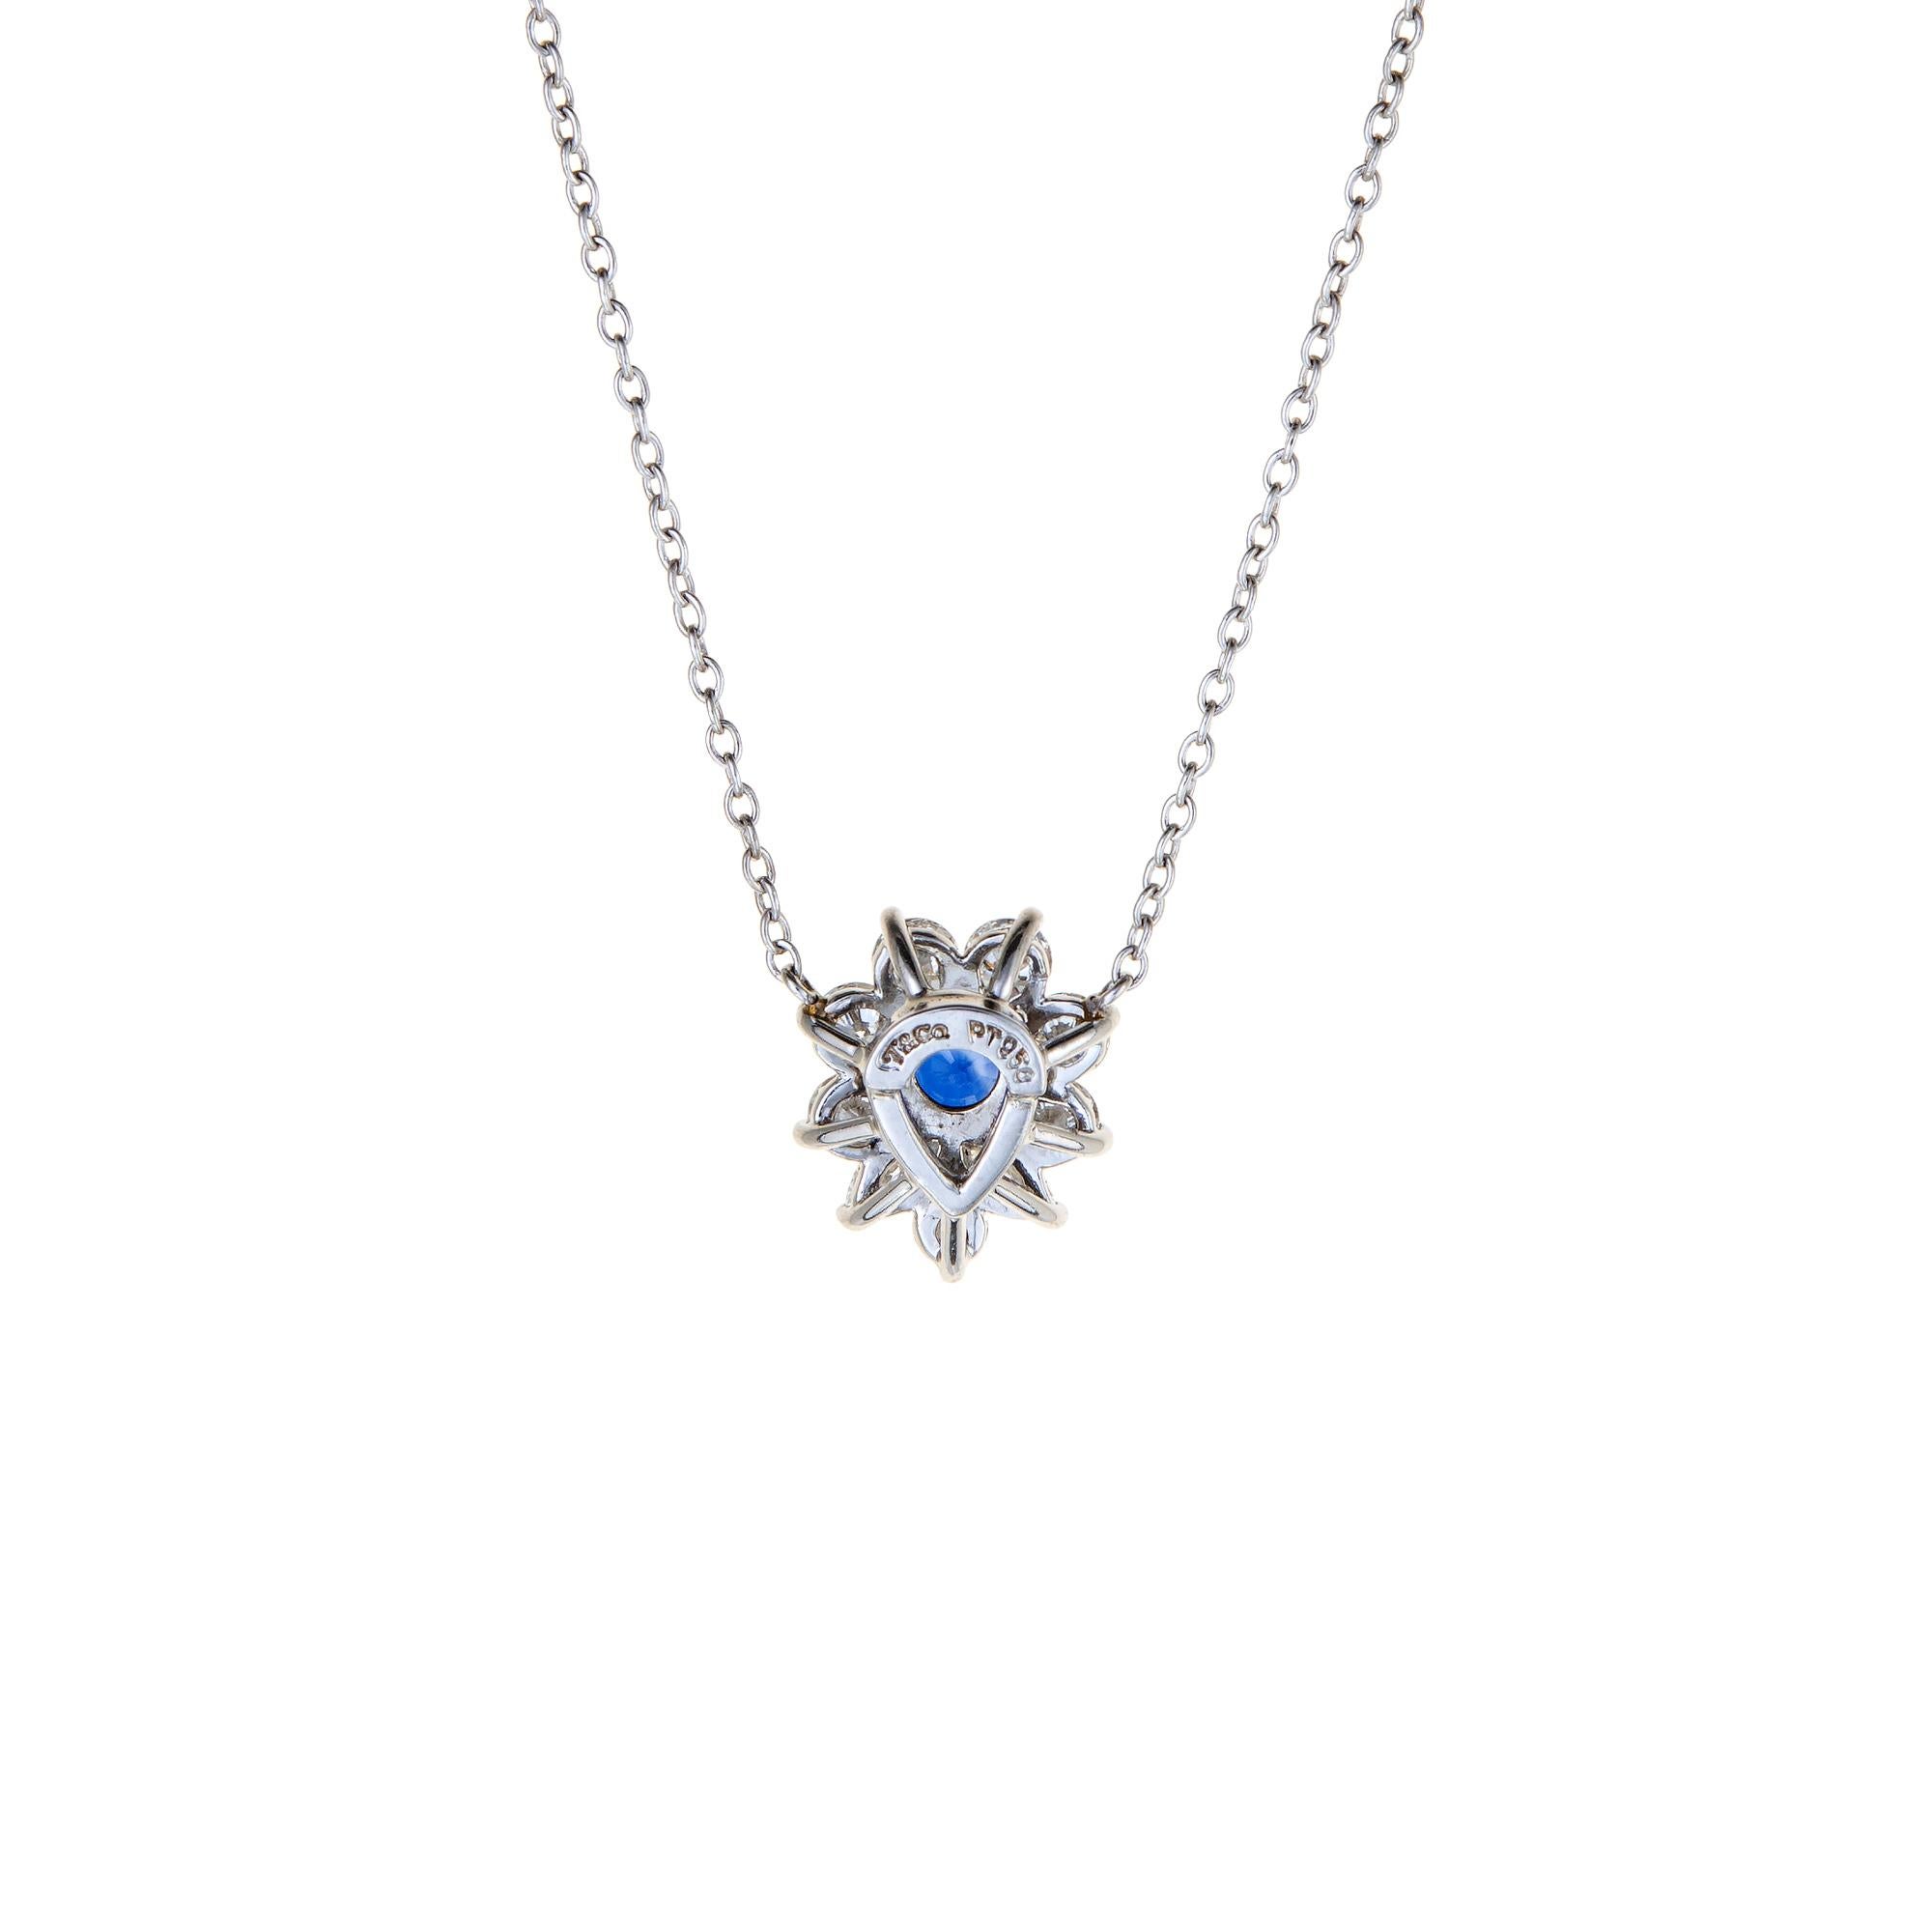 Finely detailed pre owned Tiffany & Co Victoria necklace, crafted in 950 platinum. 

9 round brilliant and marquise cut diamonds total an estimated 0.53 carats (estimated at F-G color and VVS clarity). The round cut sapphire measures 4mm and is